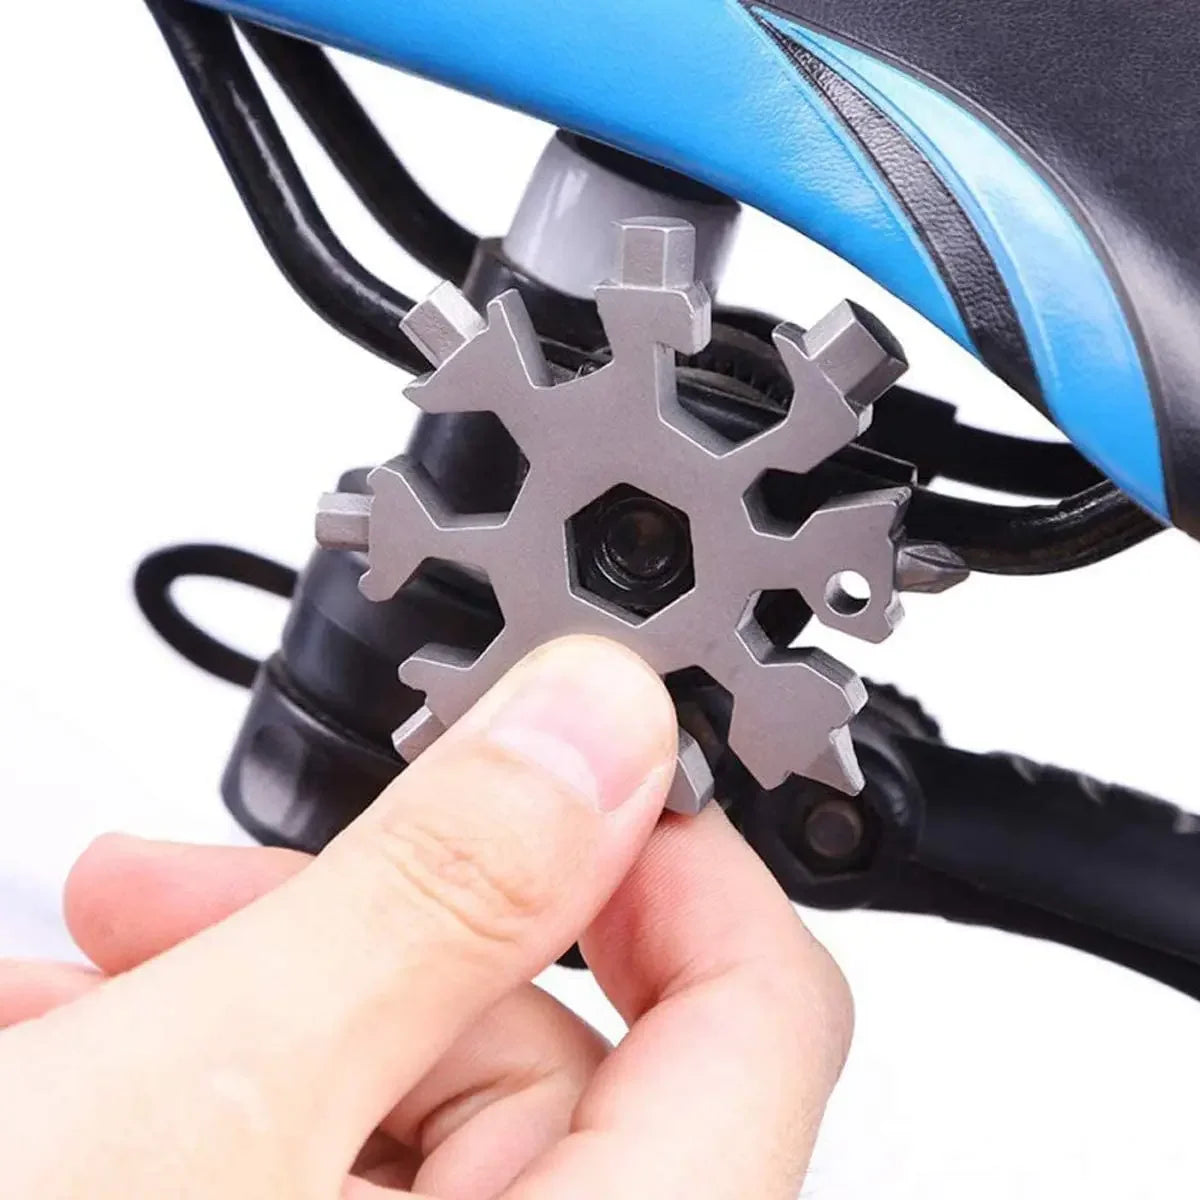 18-in-1 Snowflake Multi-Tool: Portable, Versatile, and Essential for Outdoor Adventures!